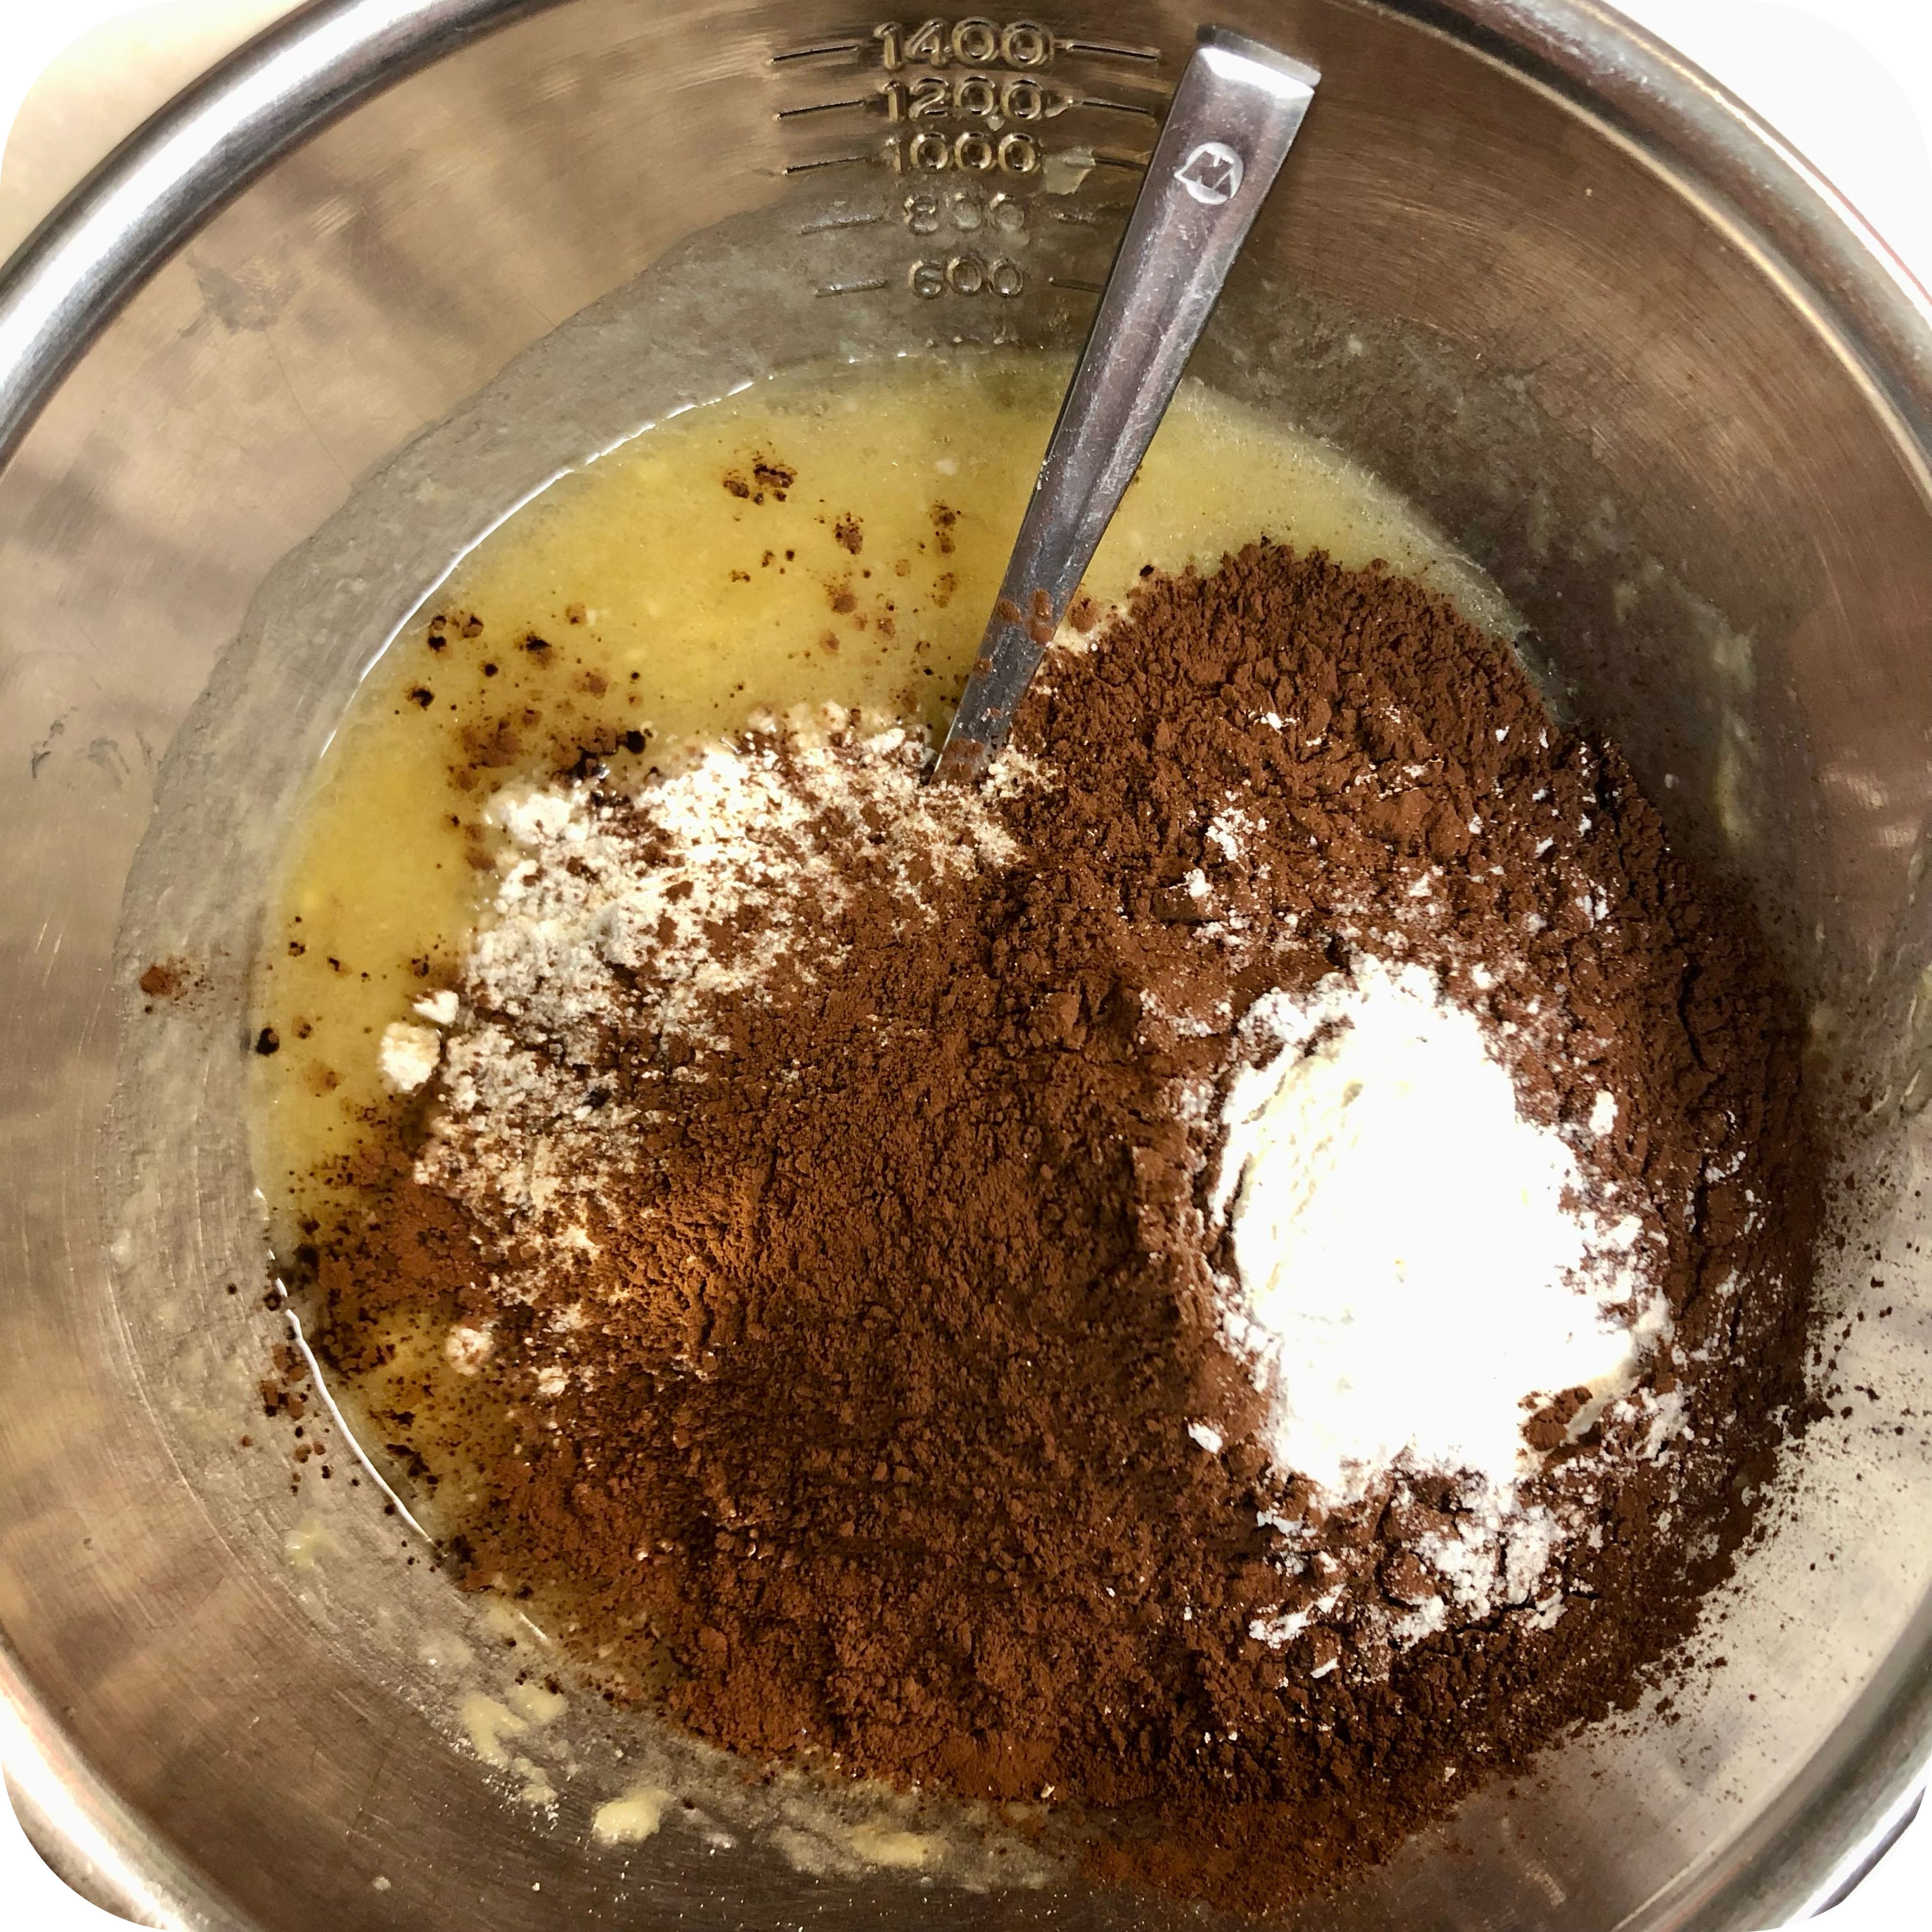 Add the oatmeal, cocoa powder and baking powder and mix well.